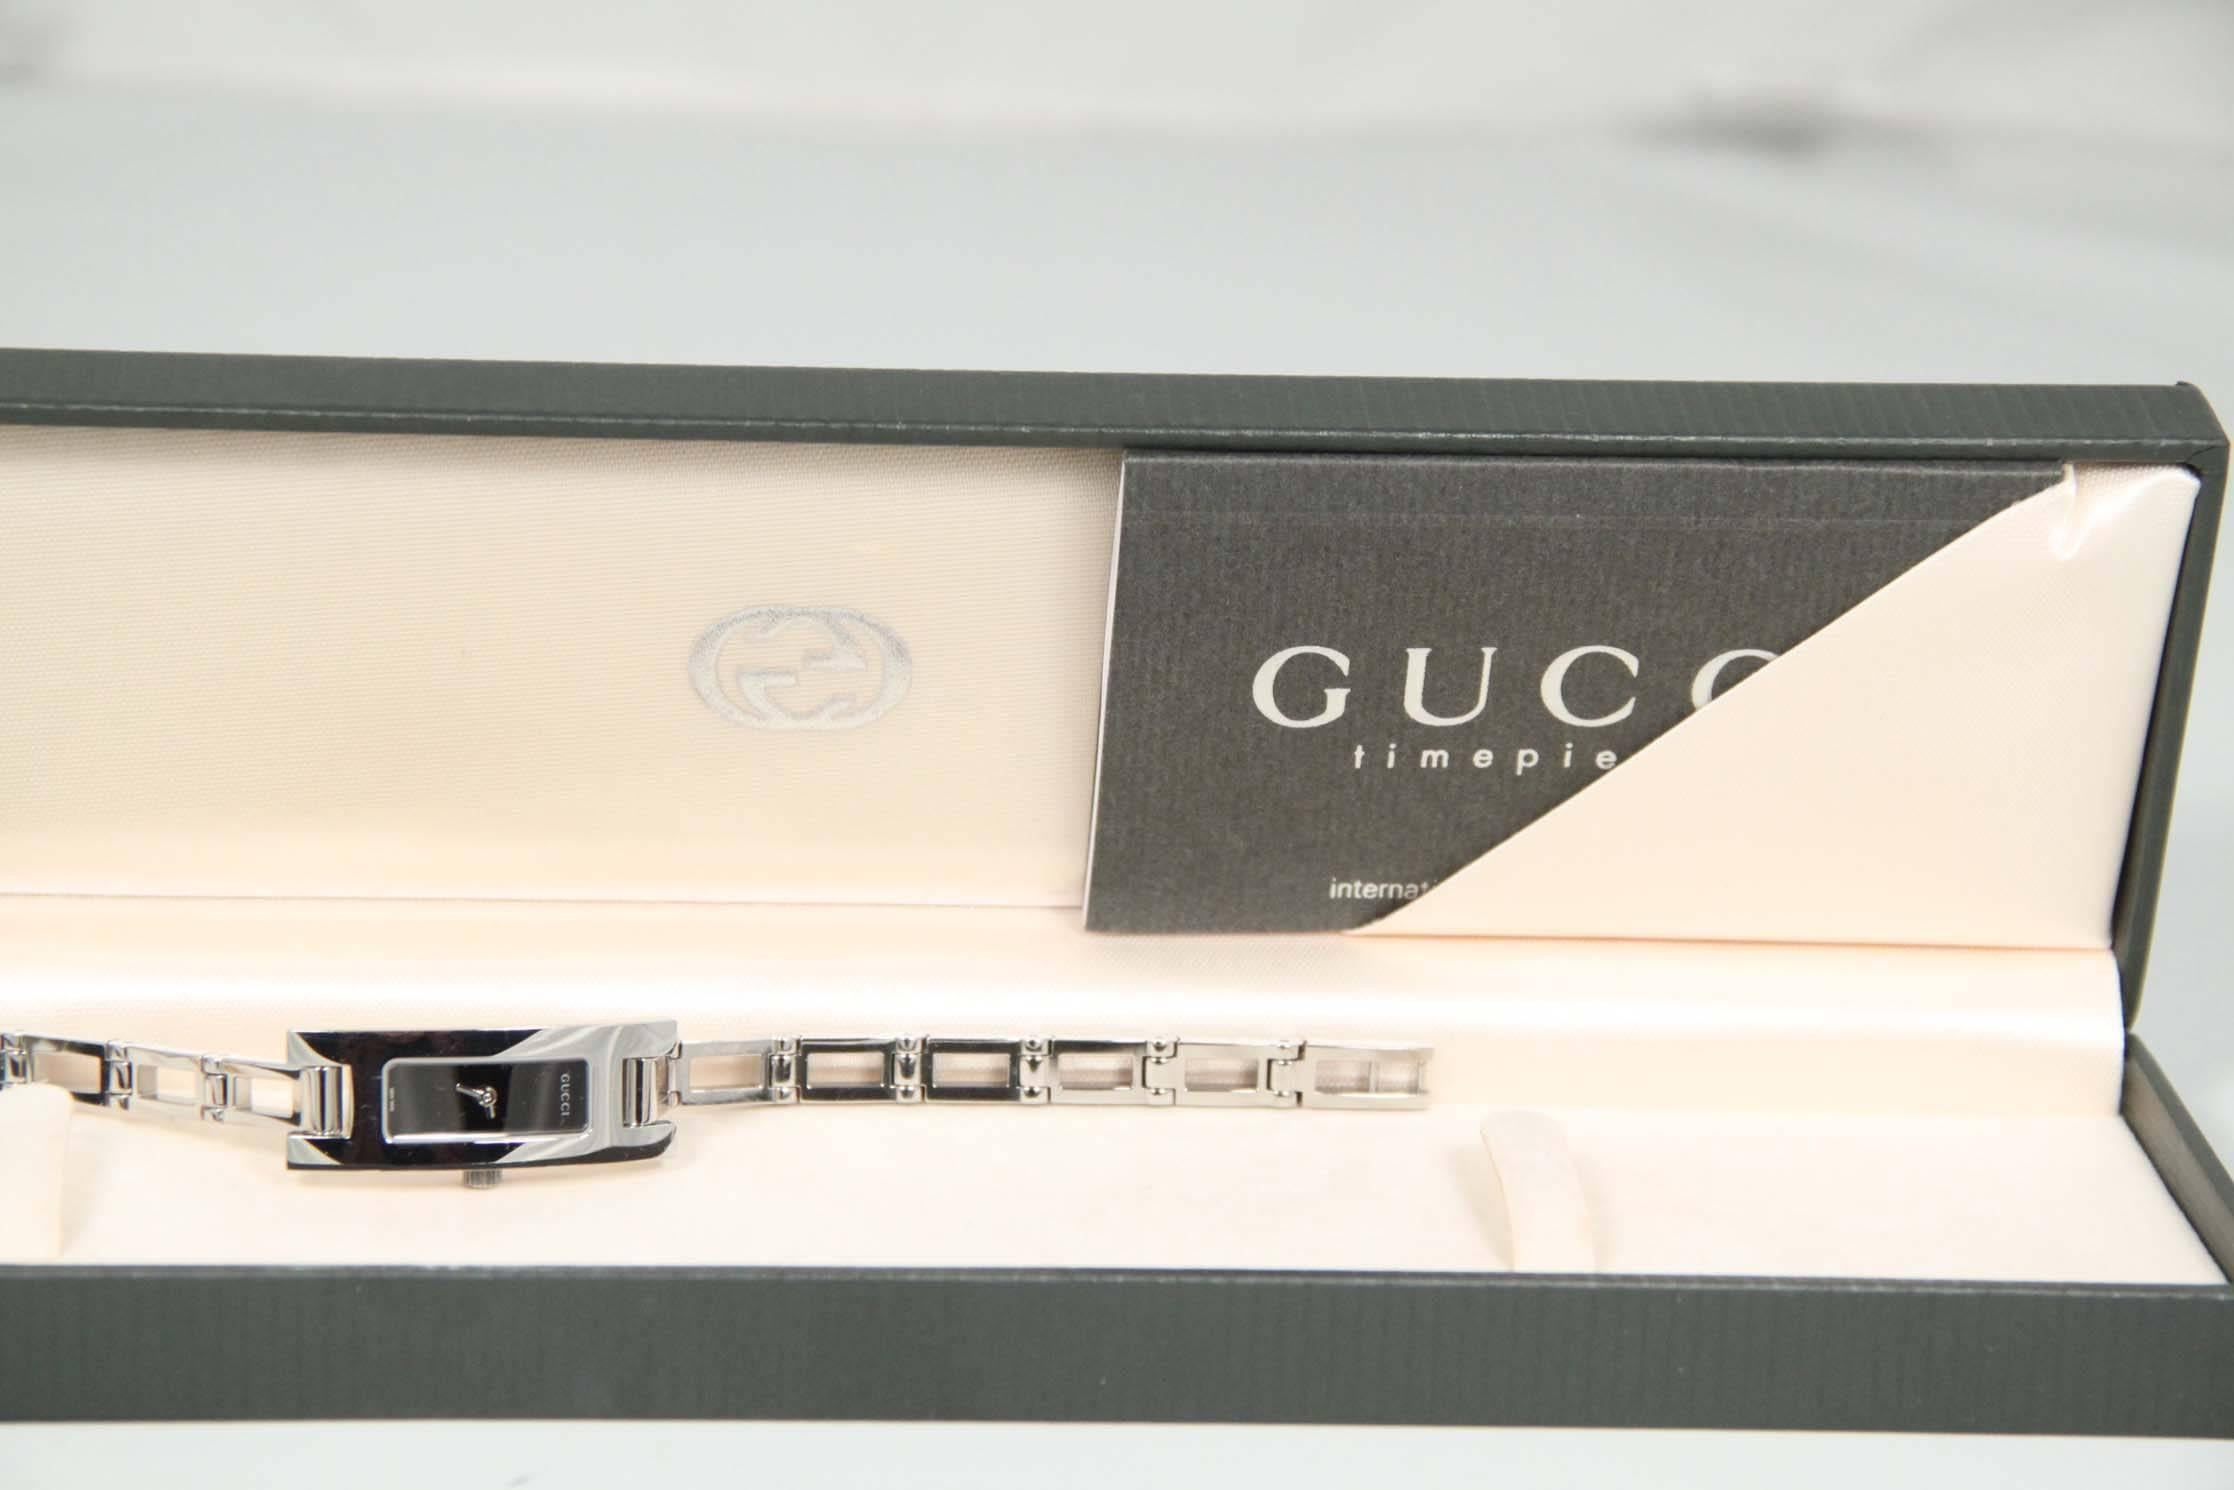 BRAND: GUCCI

MADE IN: Switzerland

LOGOS & TAGS: GUCCI written on the movement, G embossed on the crown

REF.ID: GUCCI Timepieces 3900L - 0109490

FURTHER COMMENTS: Women's stainless steel watch, model 3905L, by GUCCI. Black color dial with